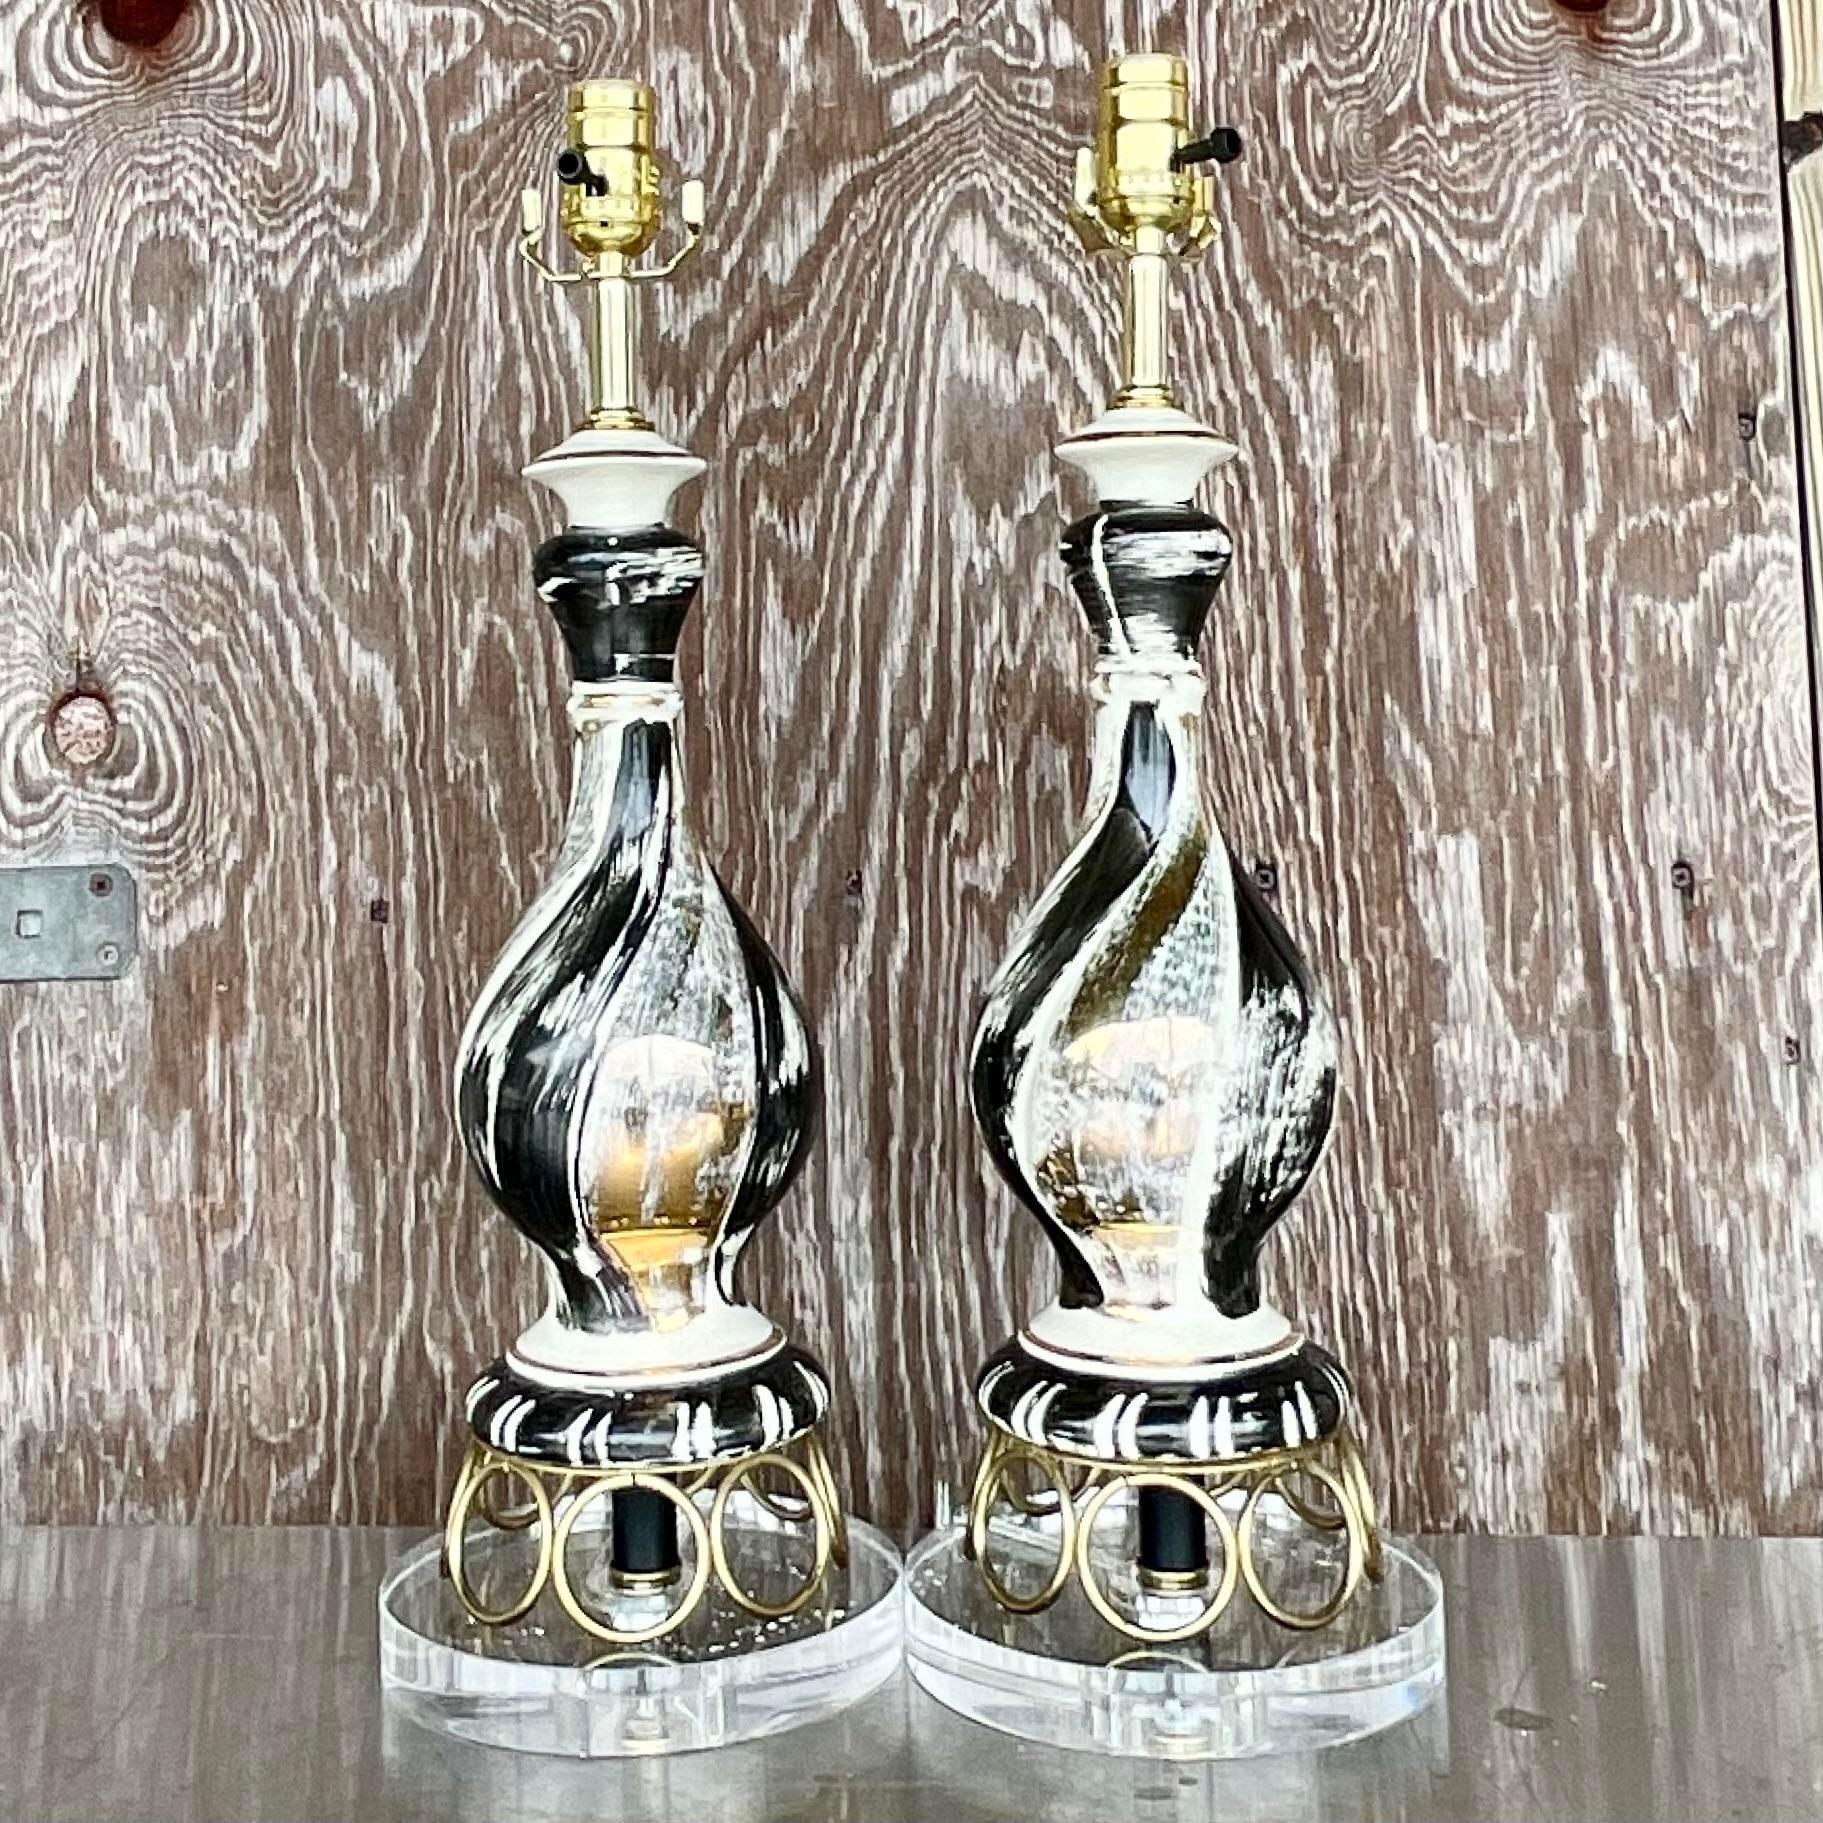 A fantastic pair of vintage MCM table lamps. Beautiful black and gold strokes on a white glazed ceramic background. Chic gold rings rest on a new lucite plinth. Fully restored with all new wiring and hardware. Acquired from a Palm Beach estate.